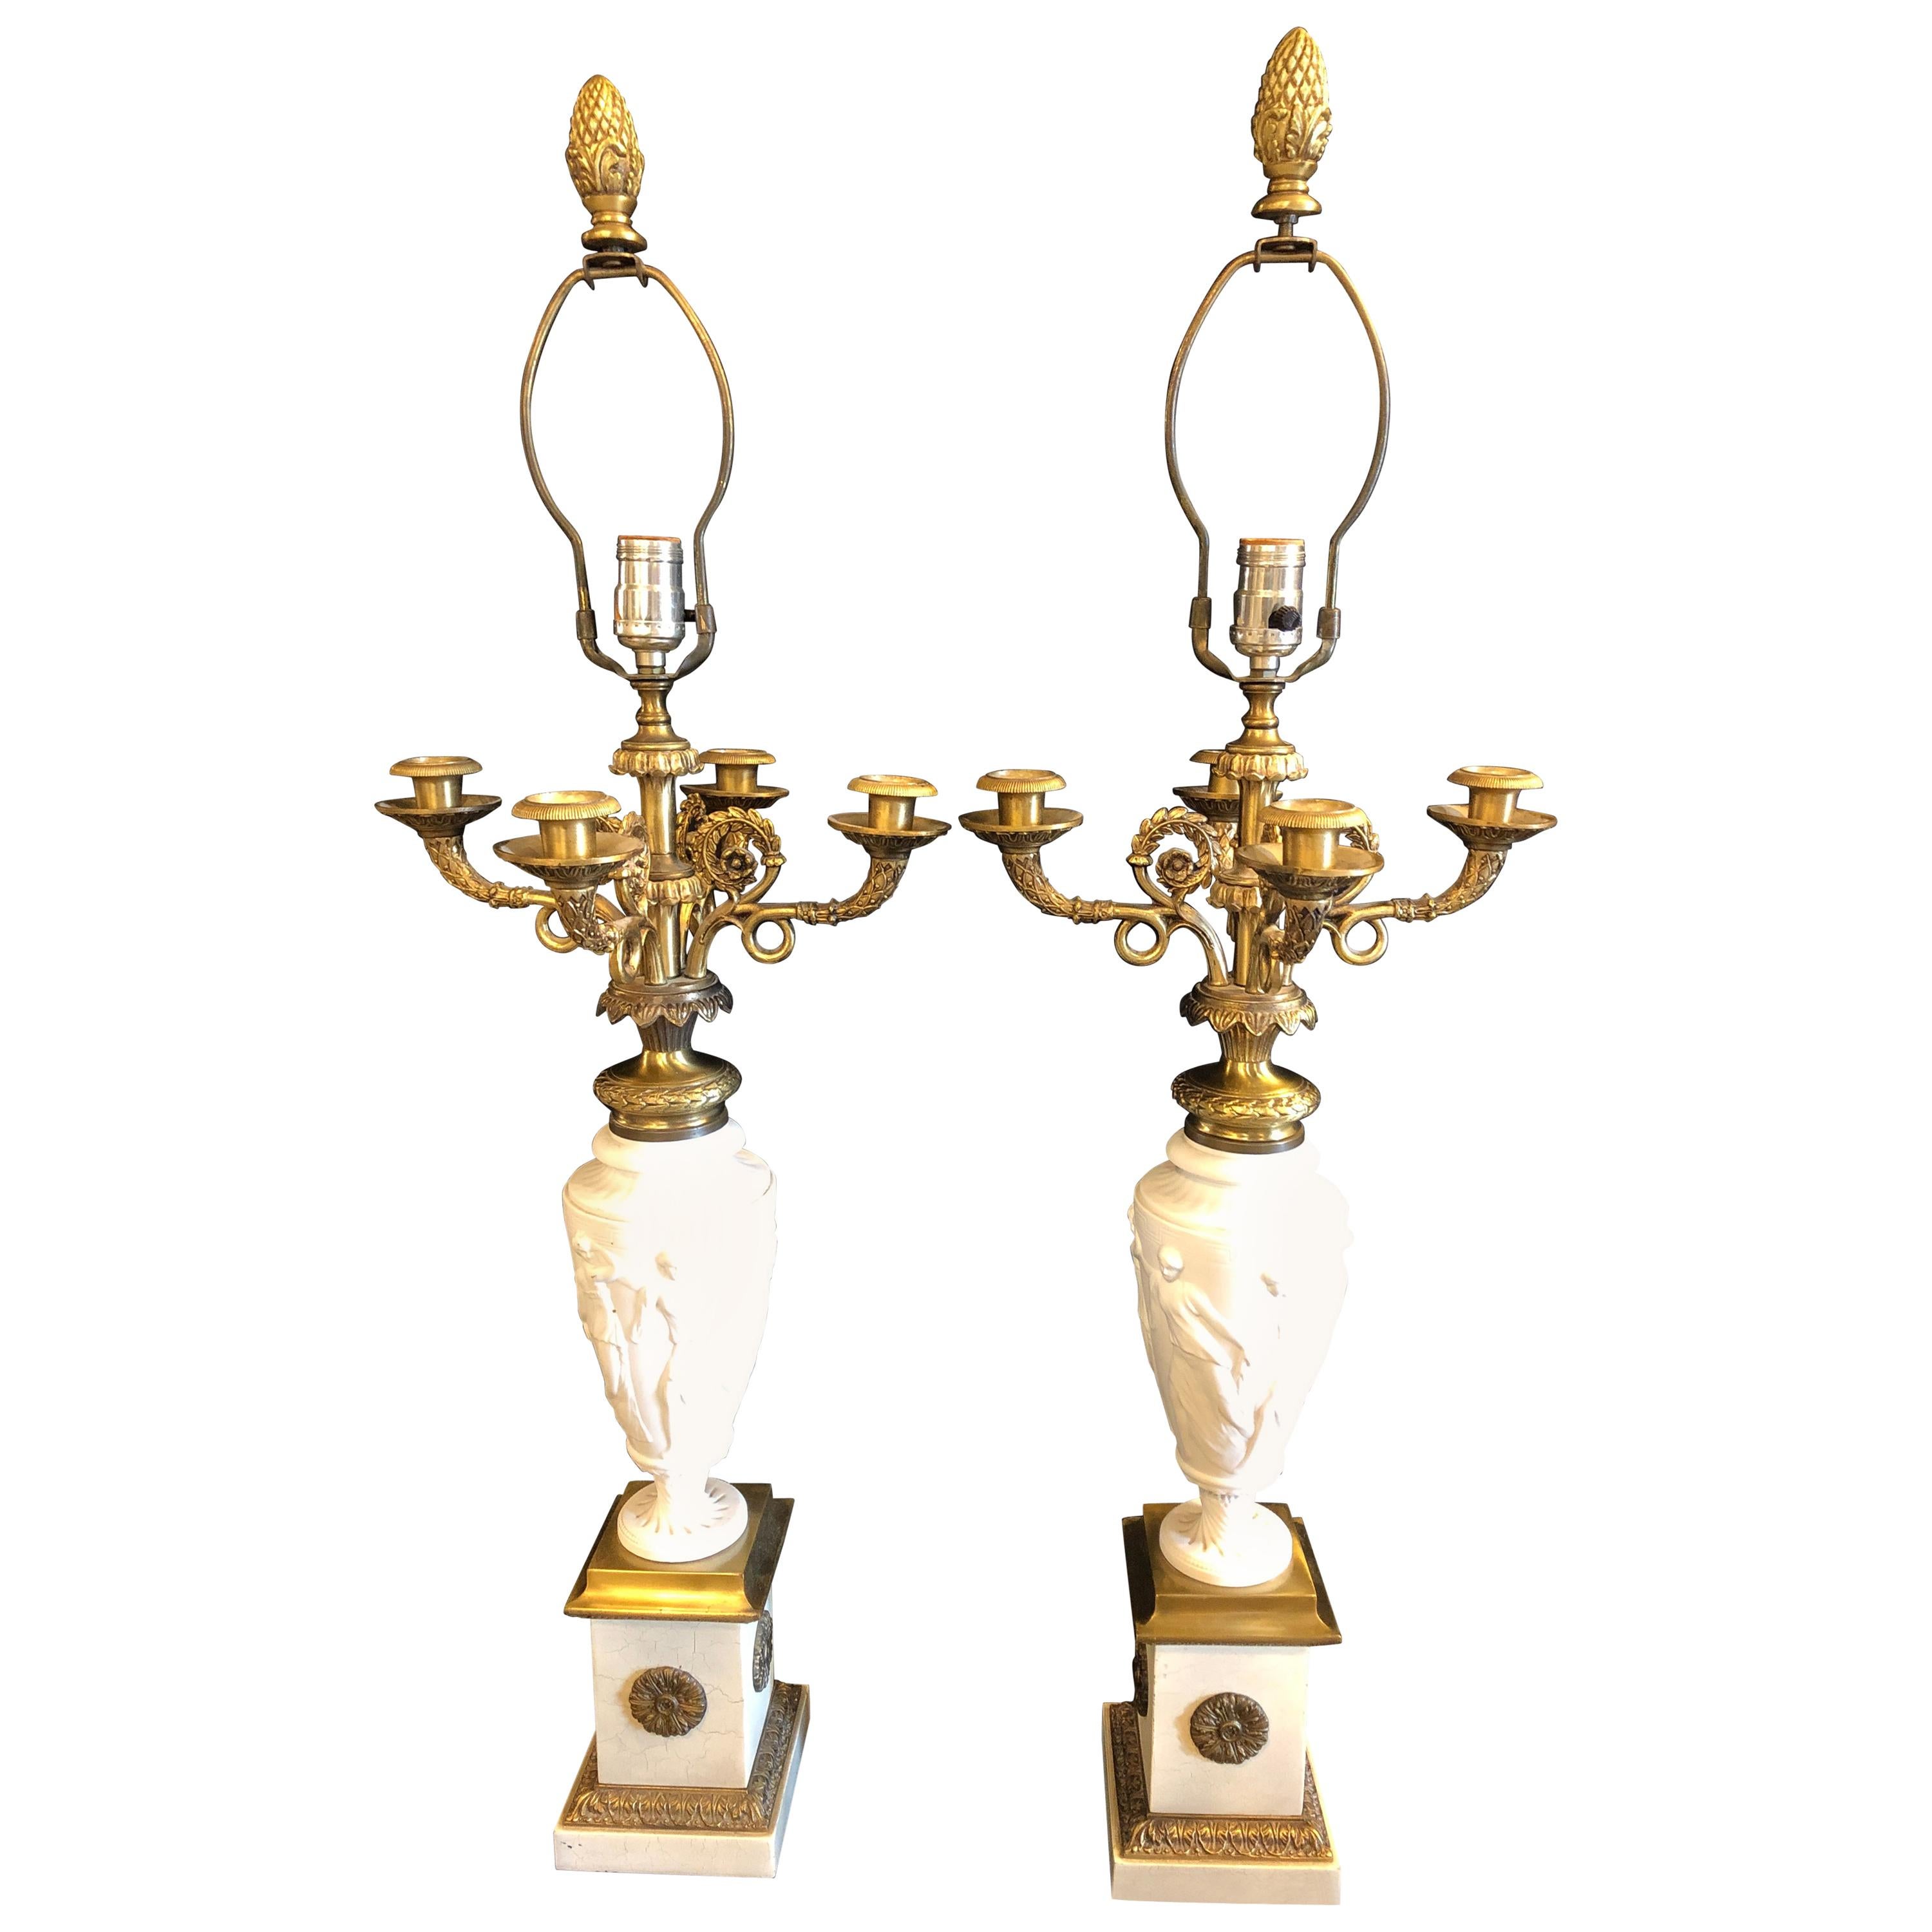 Pair of French Parian and Metal Grecian Neoclassical Figural Candelabra Lamps